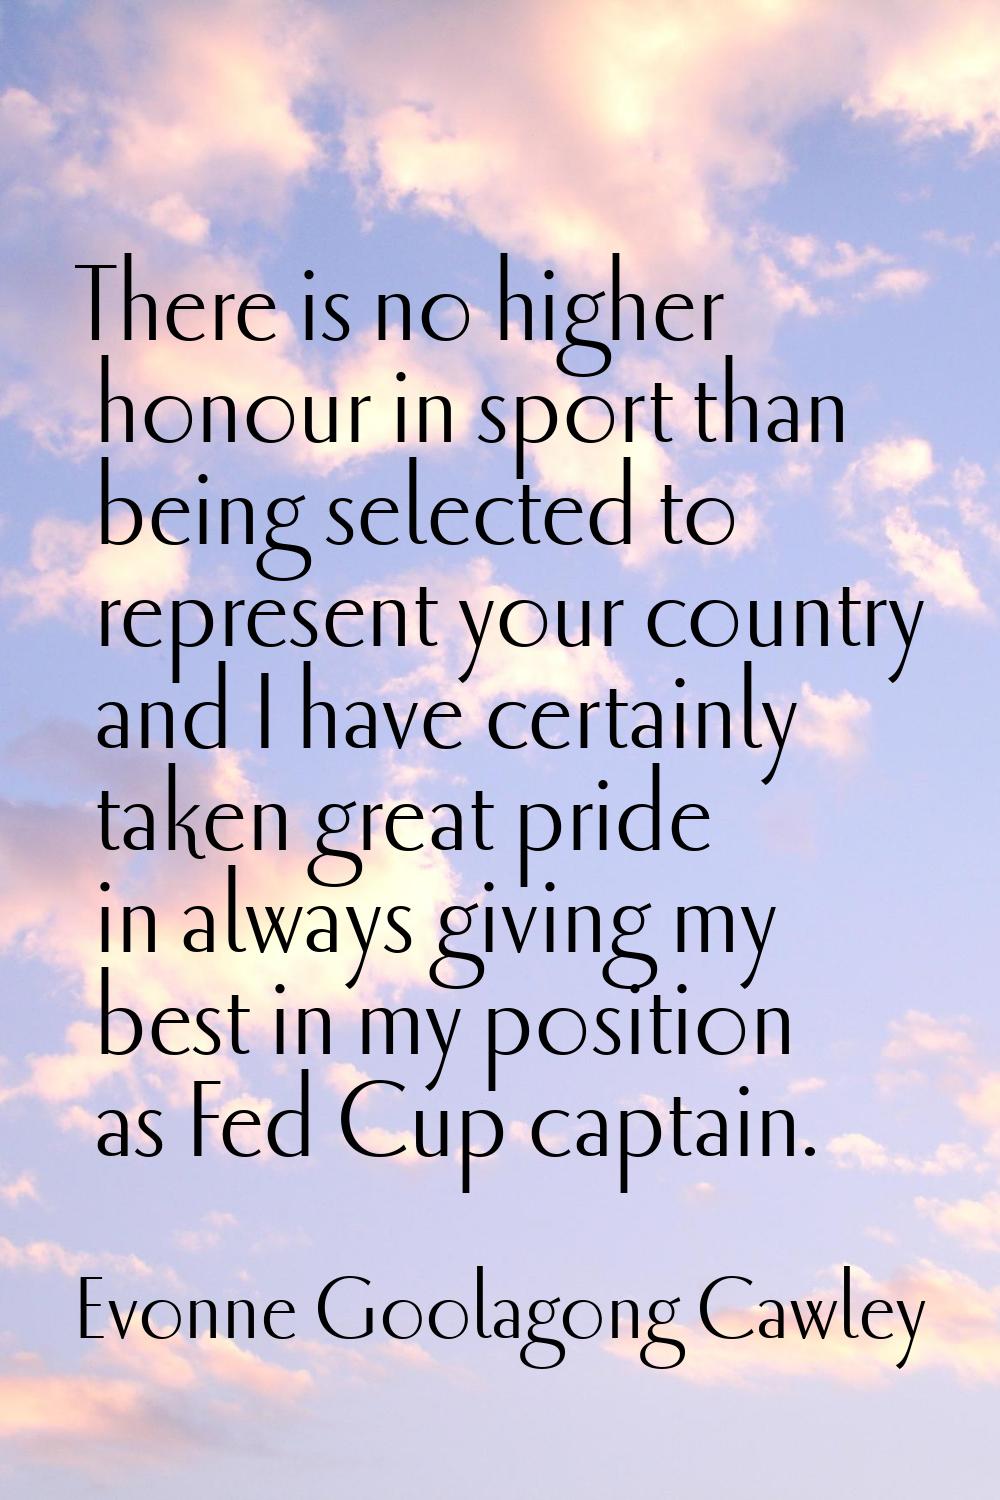 There is no higher honour in sport than being selected to represent your country and I have certain